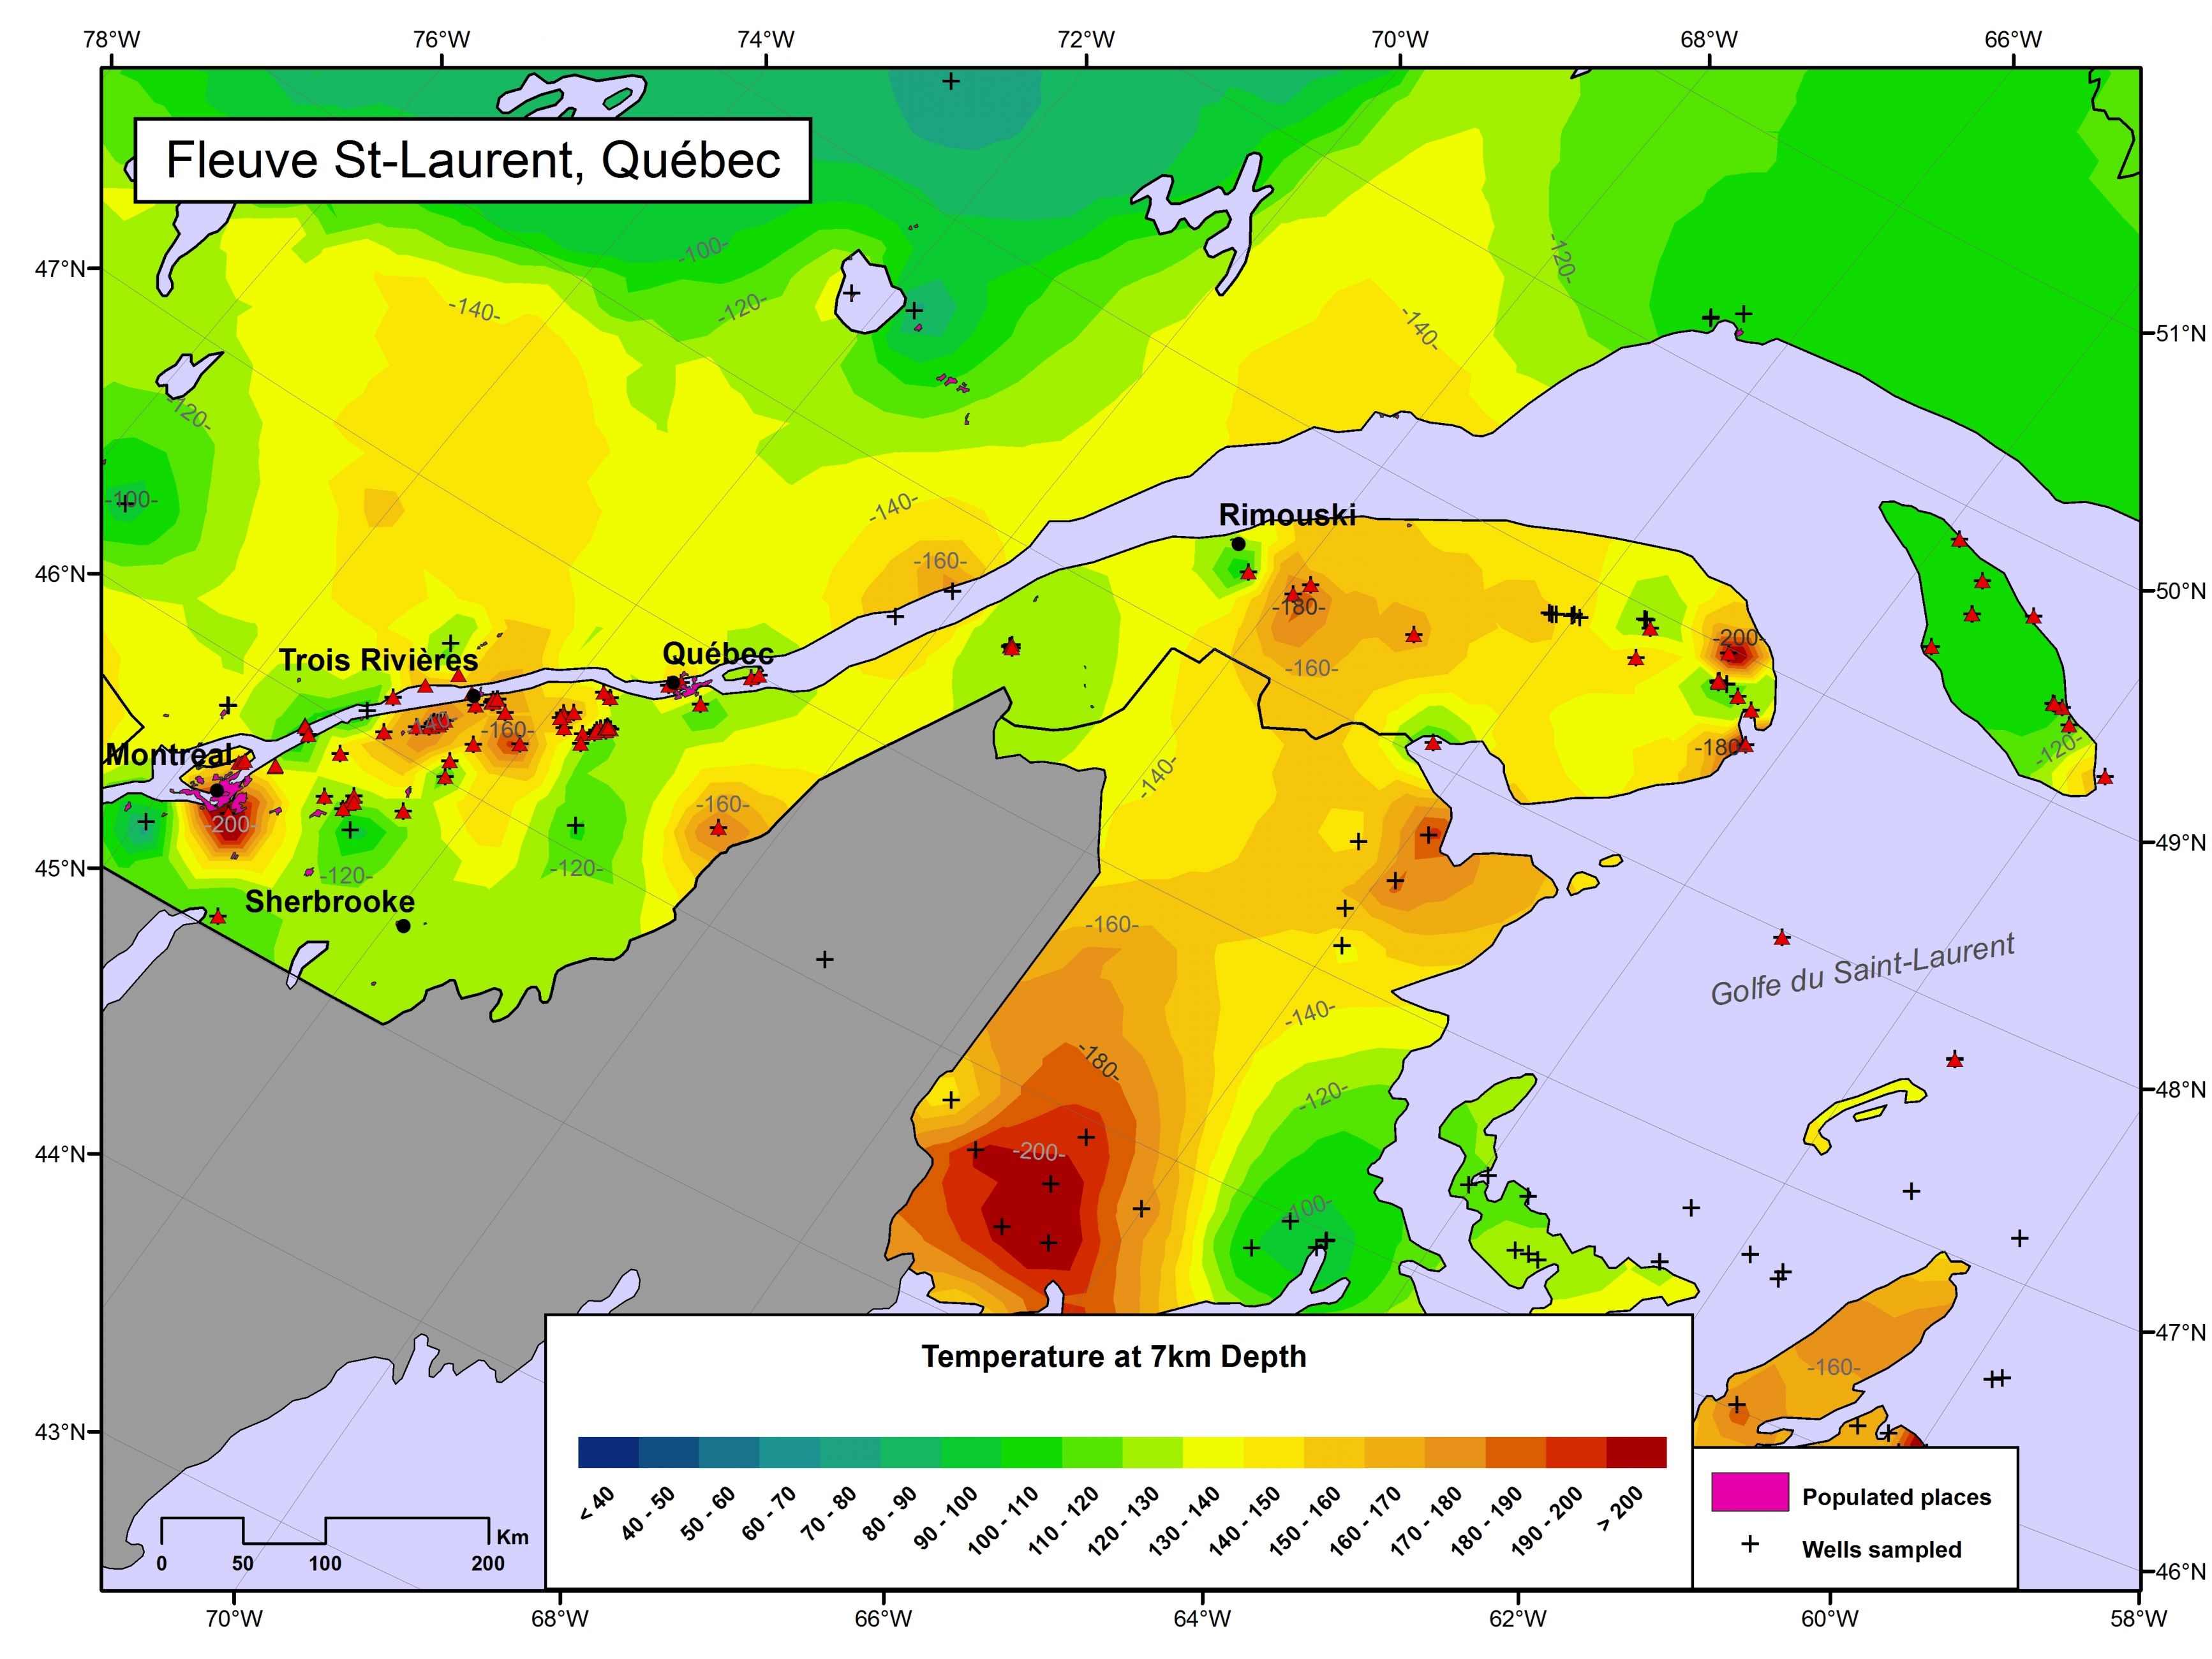 Map of temperatures at a 7 km depth along the St. Lawrence River valley